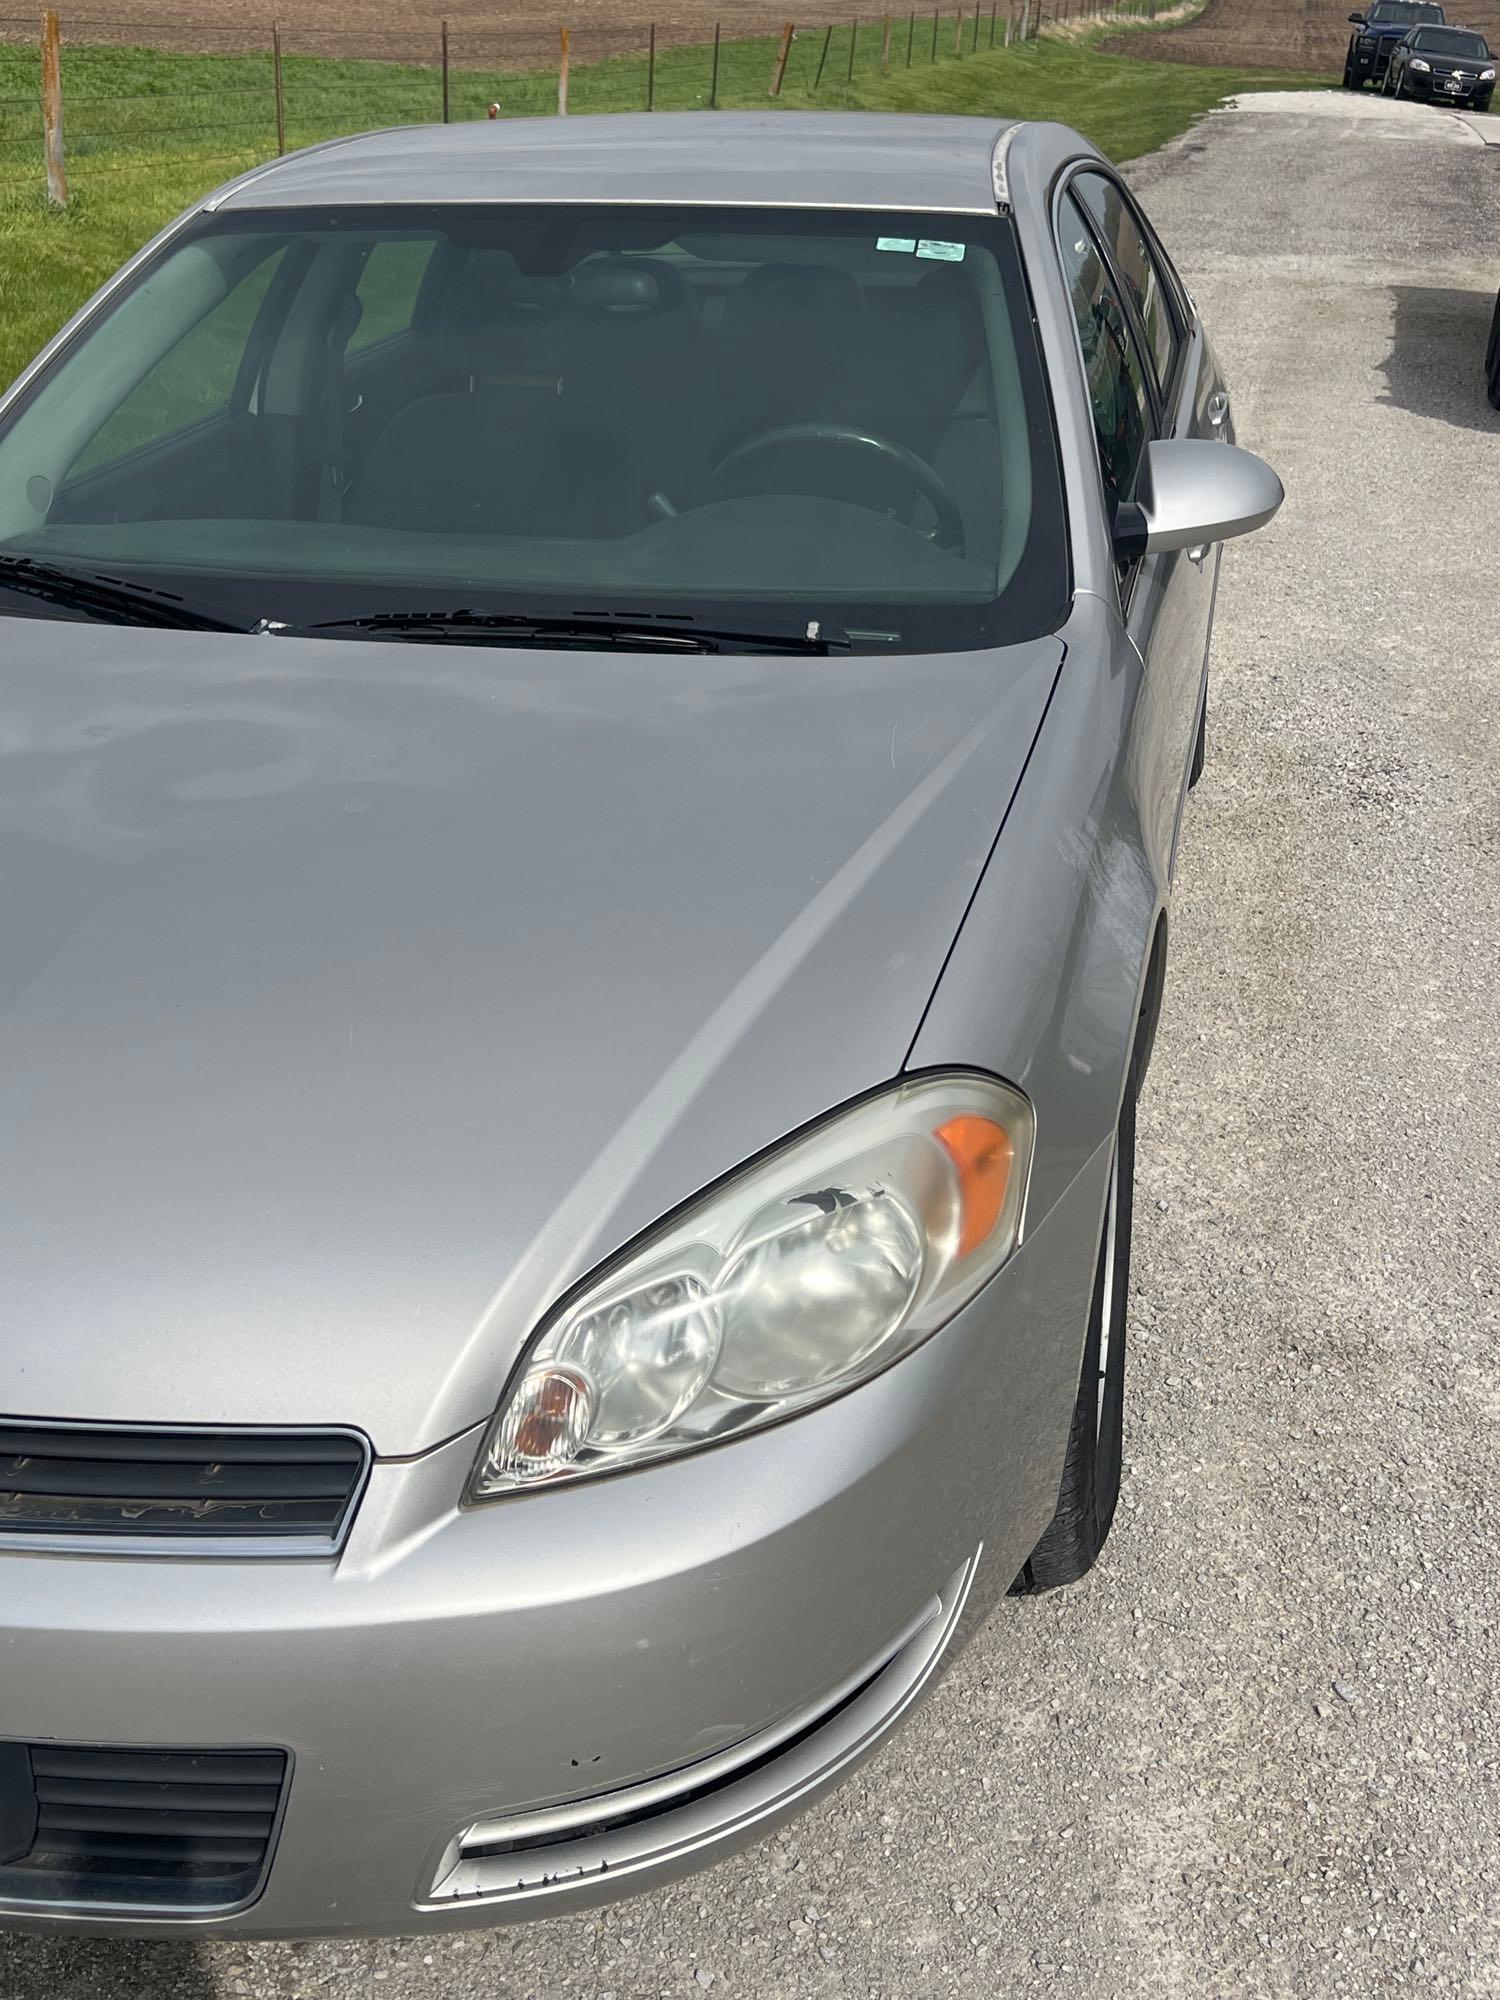 2006 Chevy Impala LT with 82,0XX miles v6 runs and drives see description